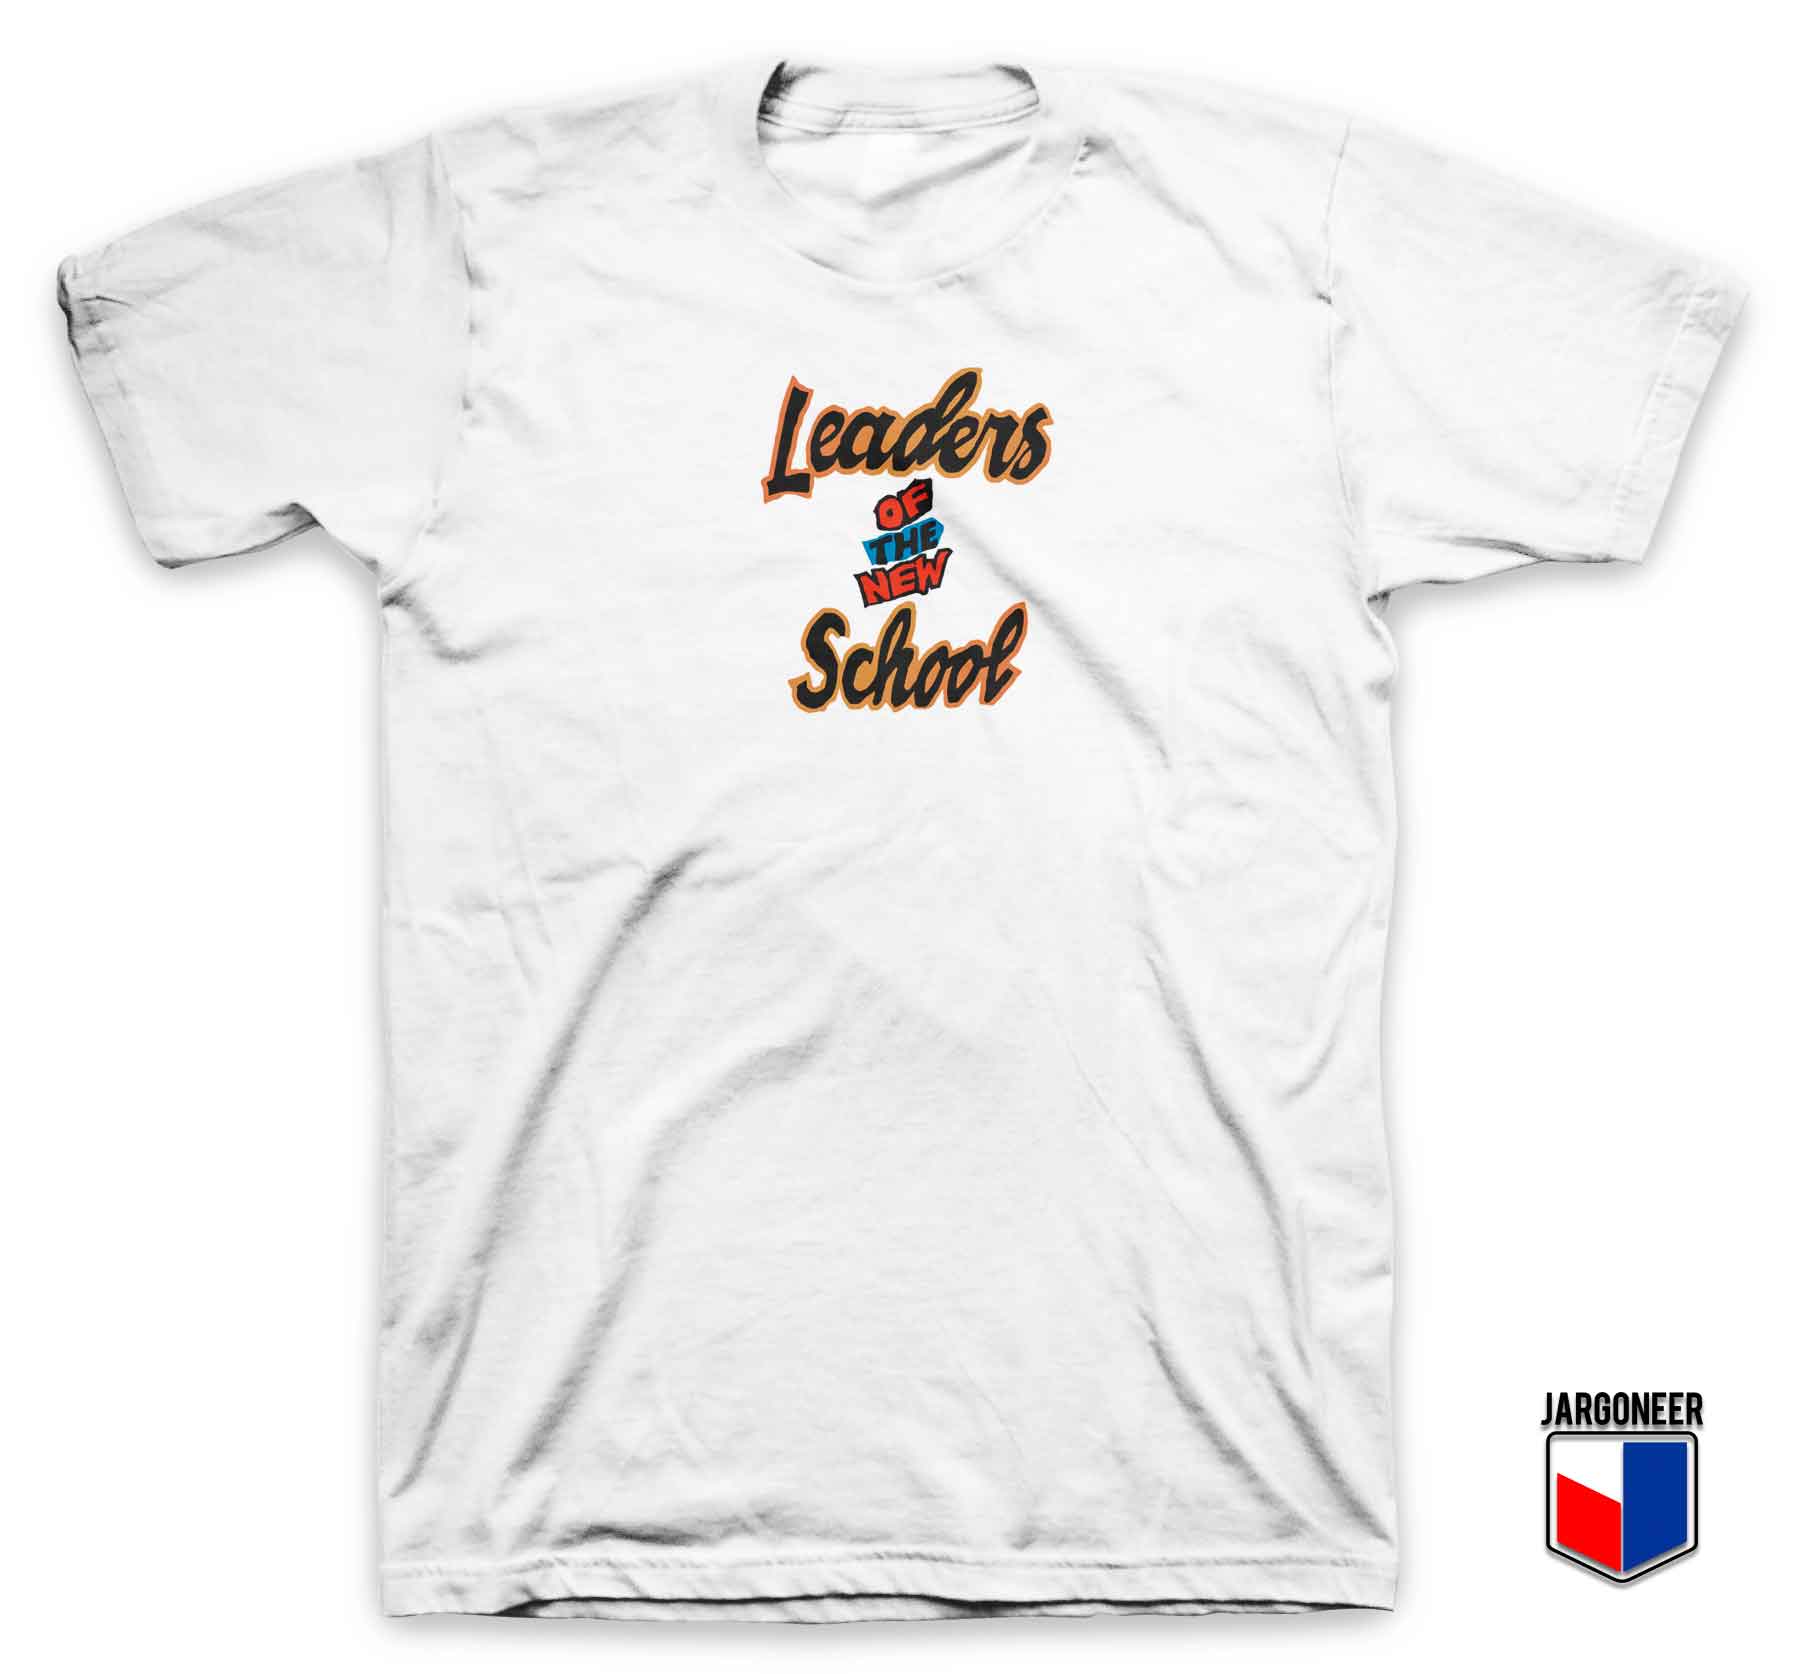 Leaders Of The New School T Shirt - Shop Unique Graphic Cool Shirt Designs